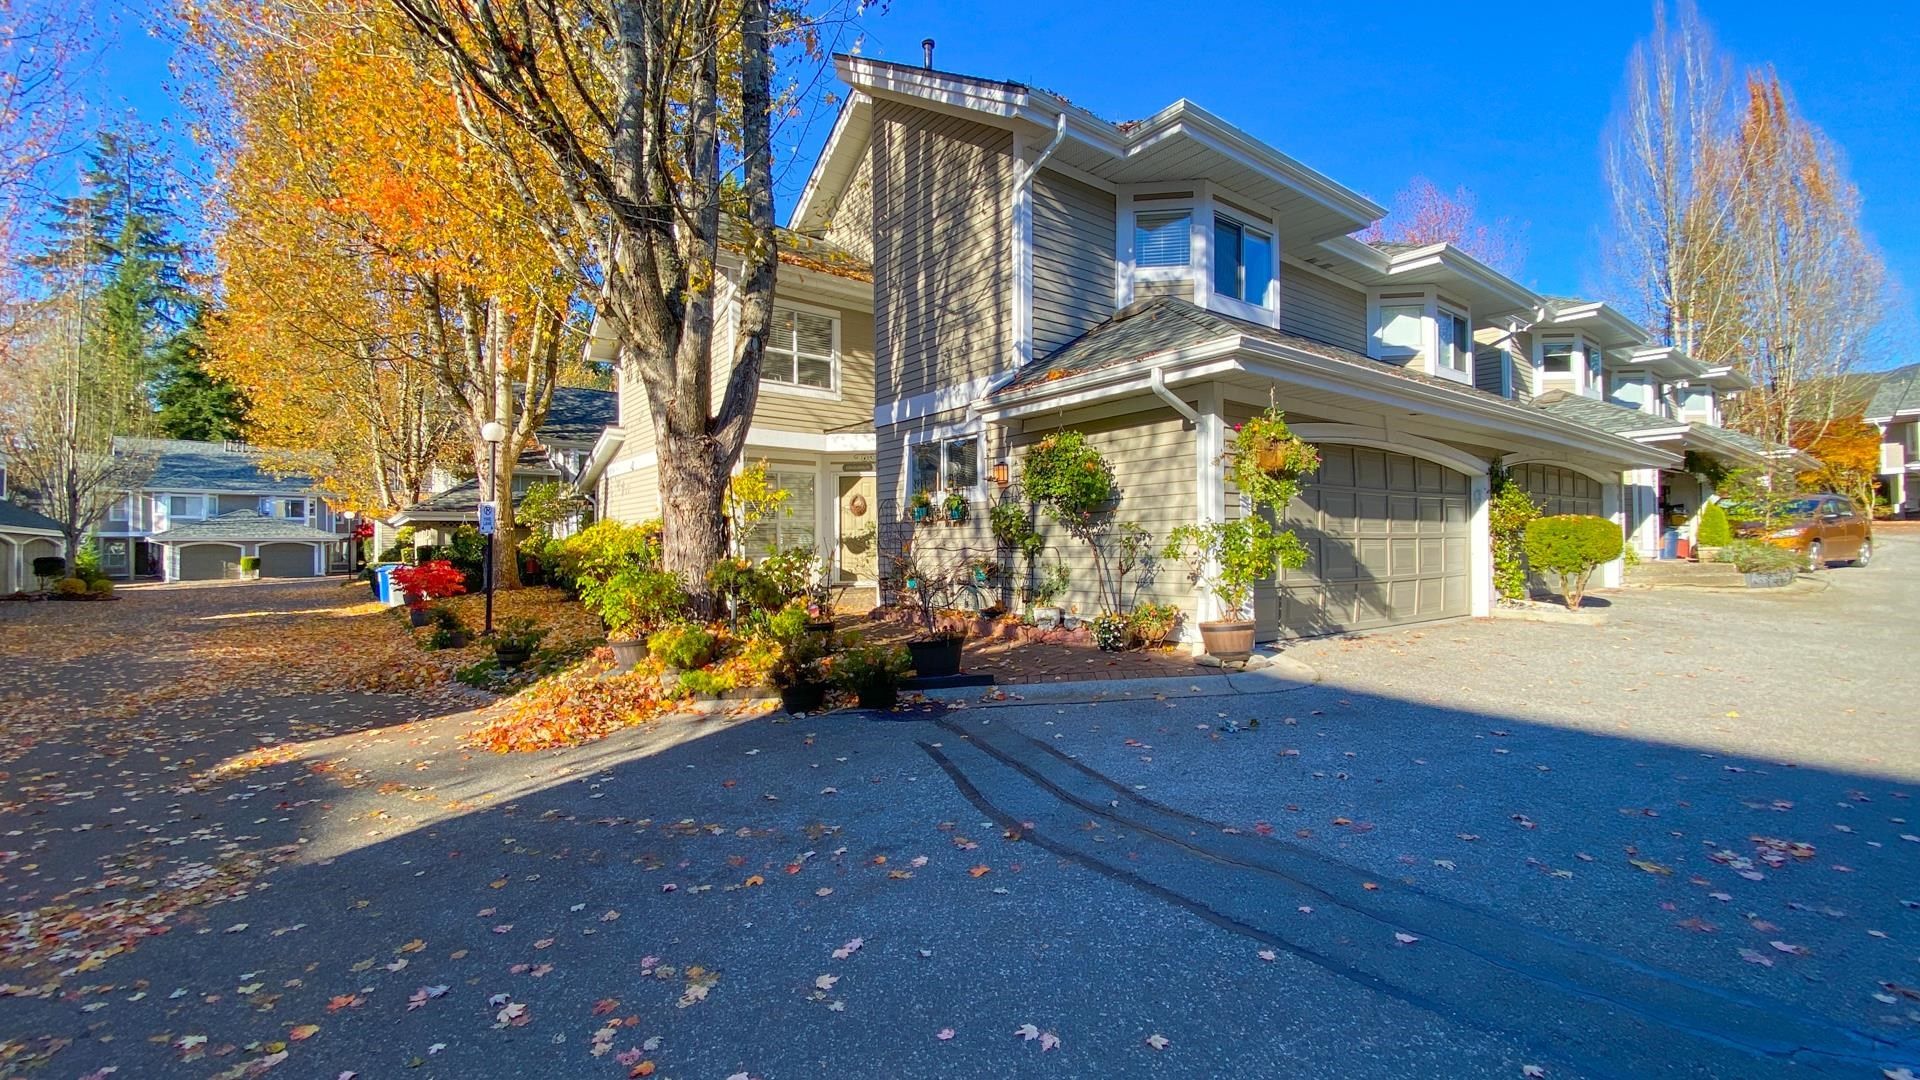 New property listed in Roche Point, North Vancouver